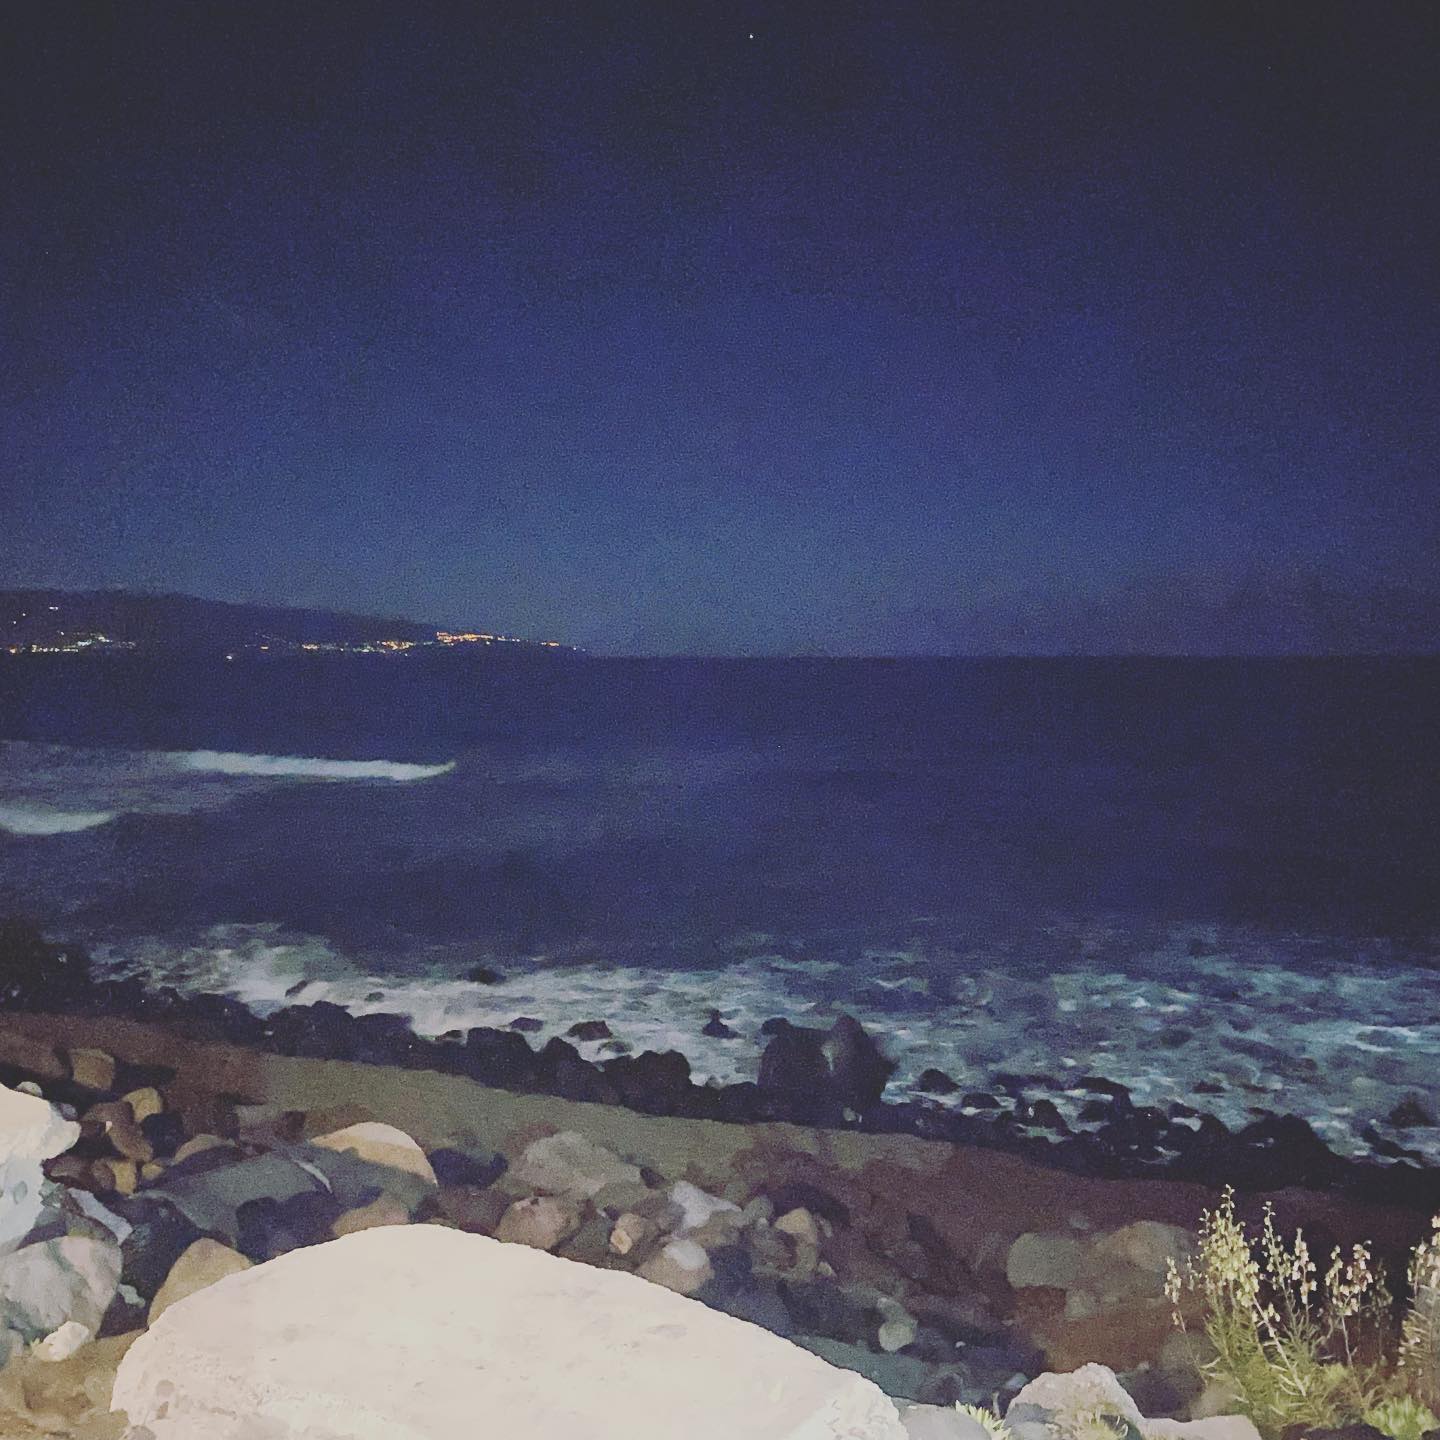 5AM Meditation at the beach … who’s bright idea was this ??!!